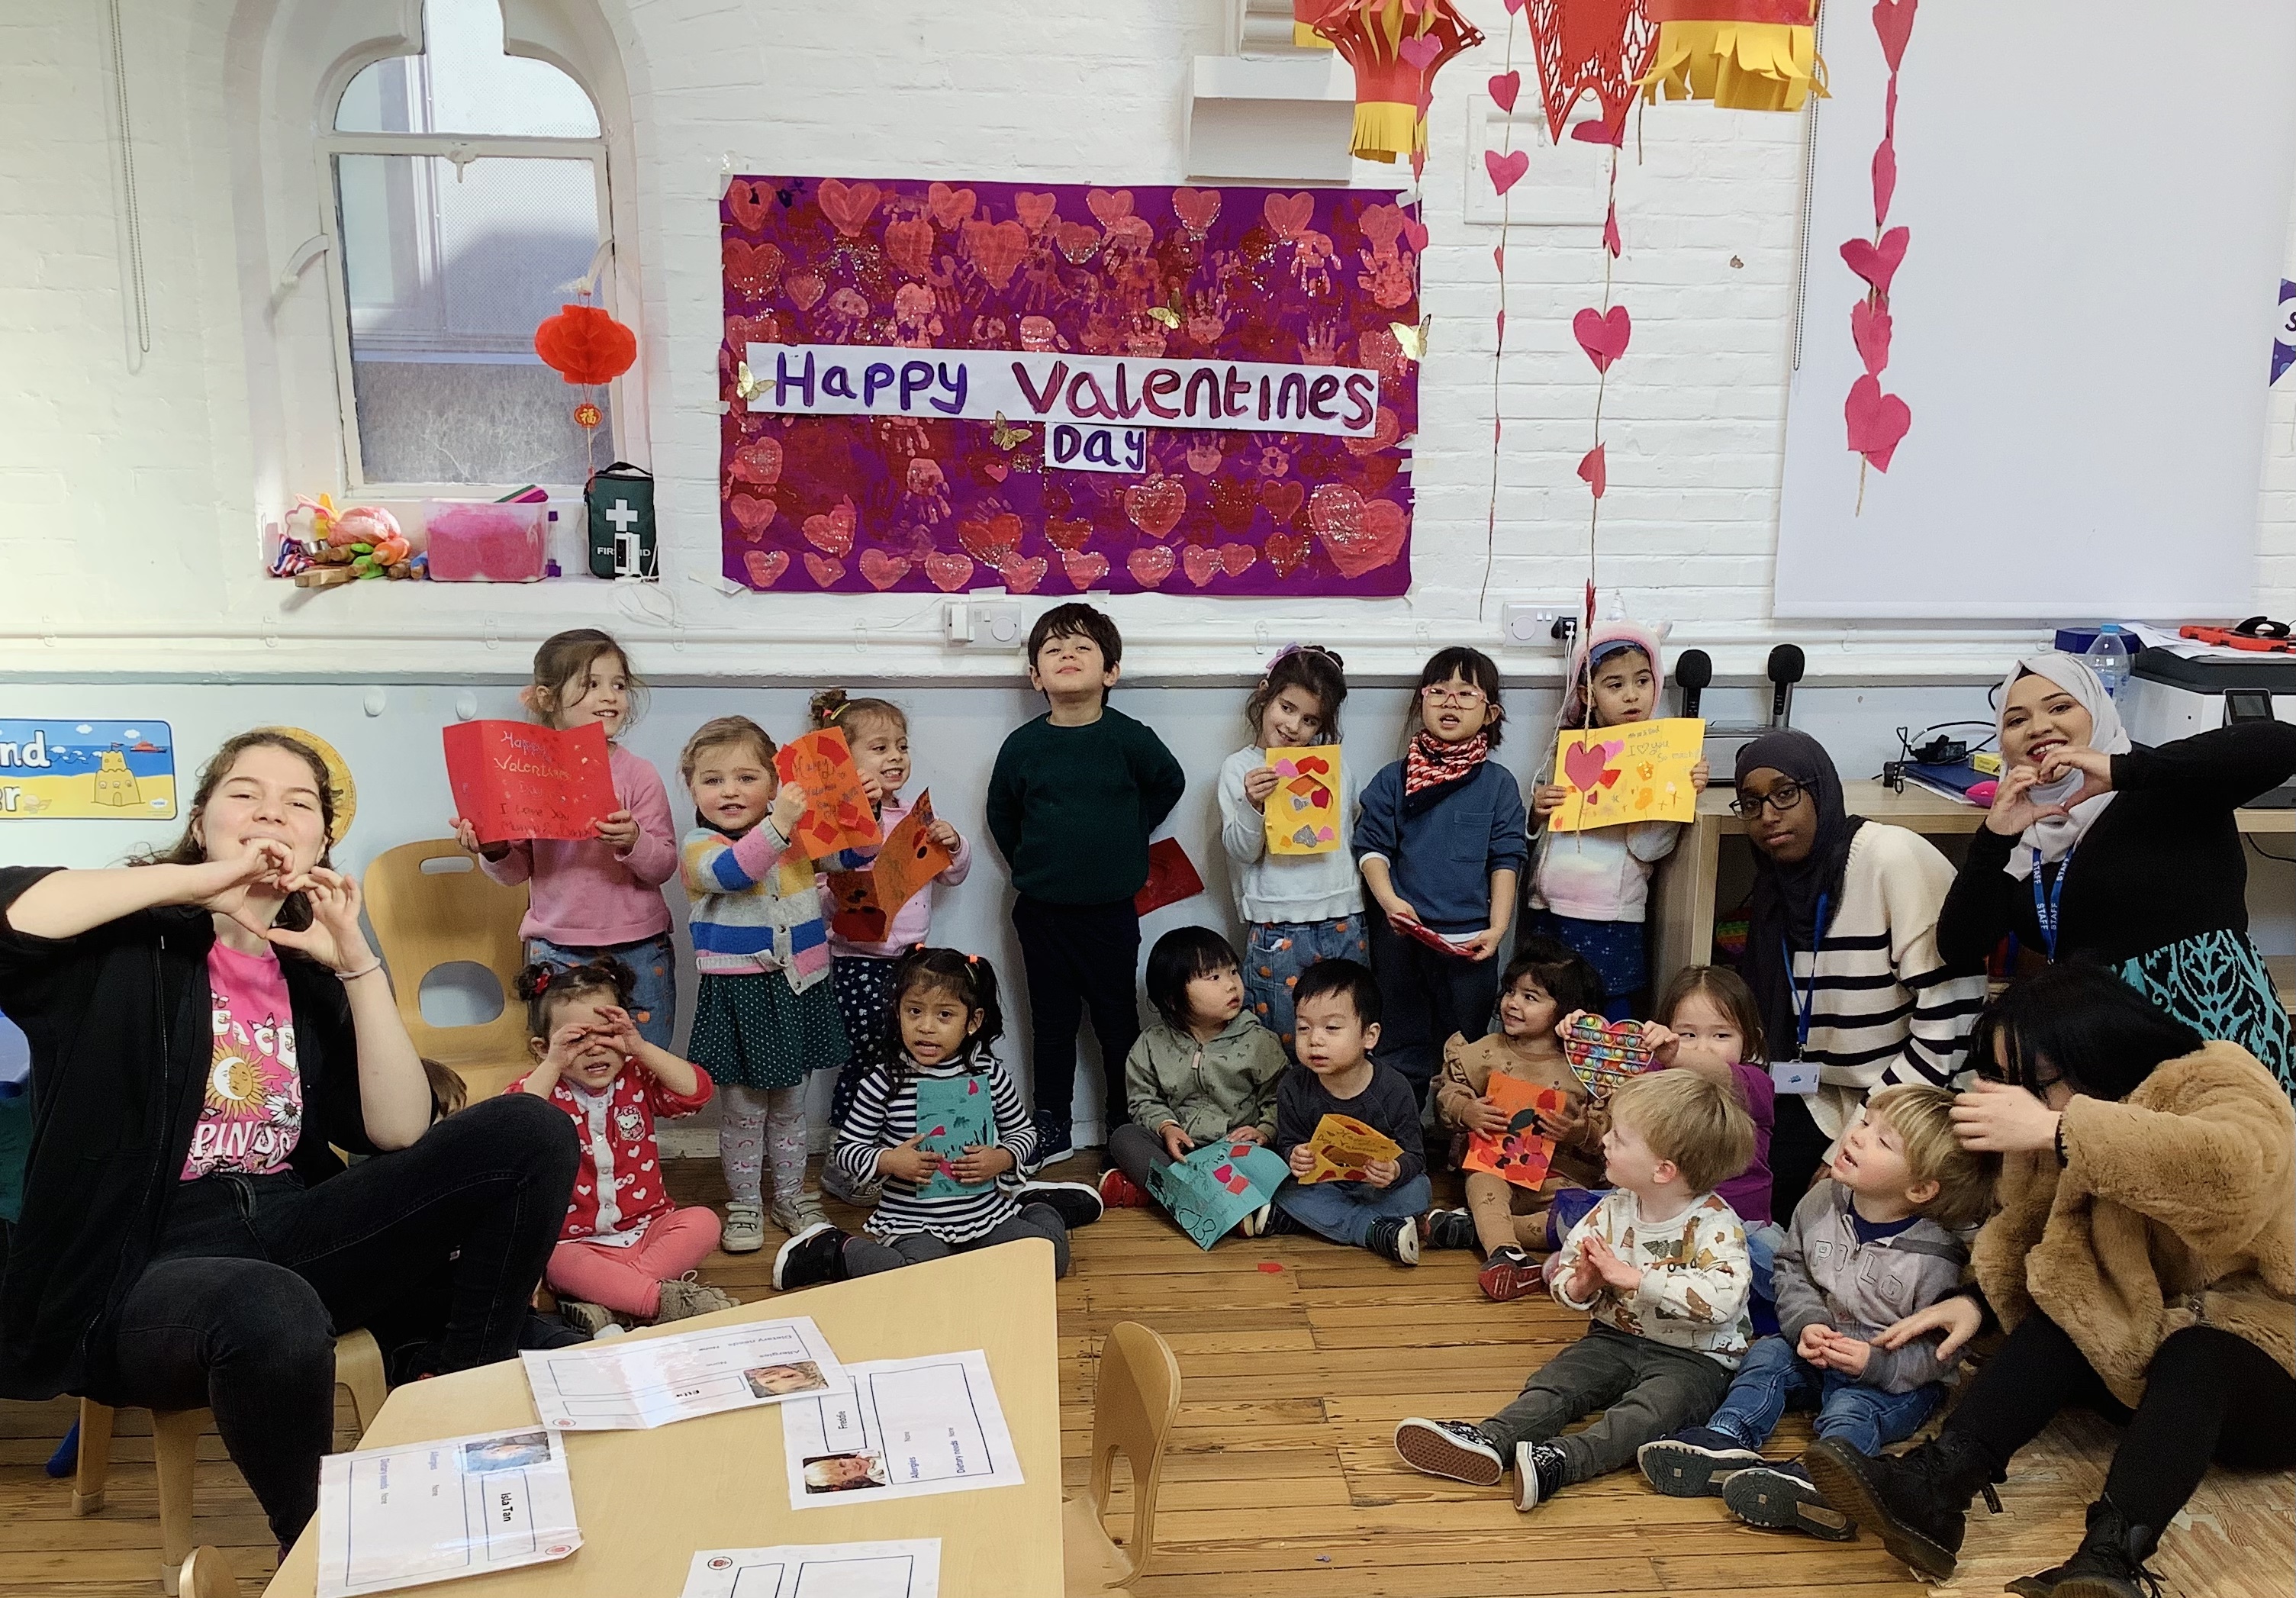 Wishing our parents a very loving Valentines day from our preschool nursery children